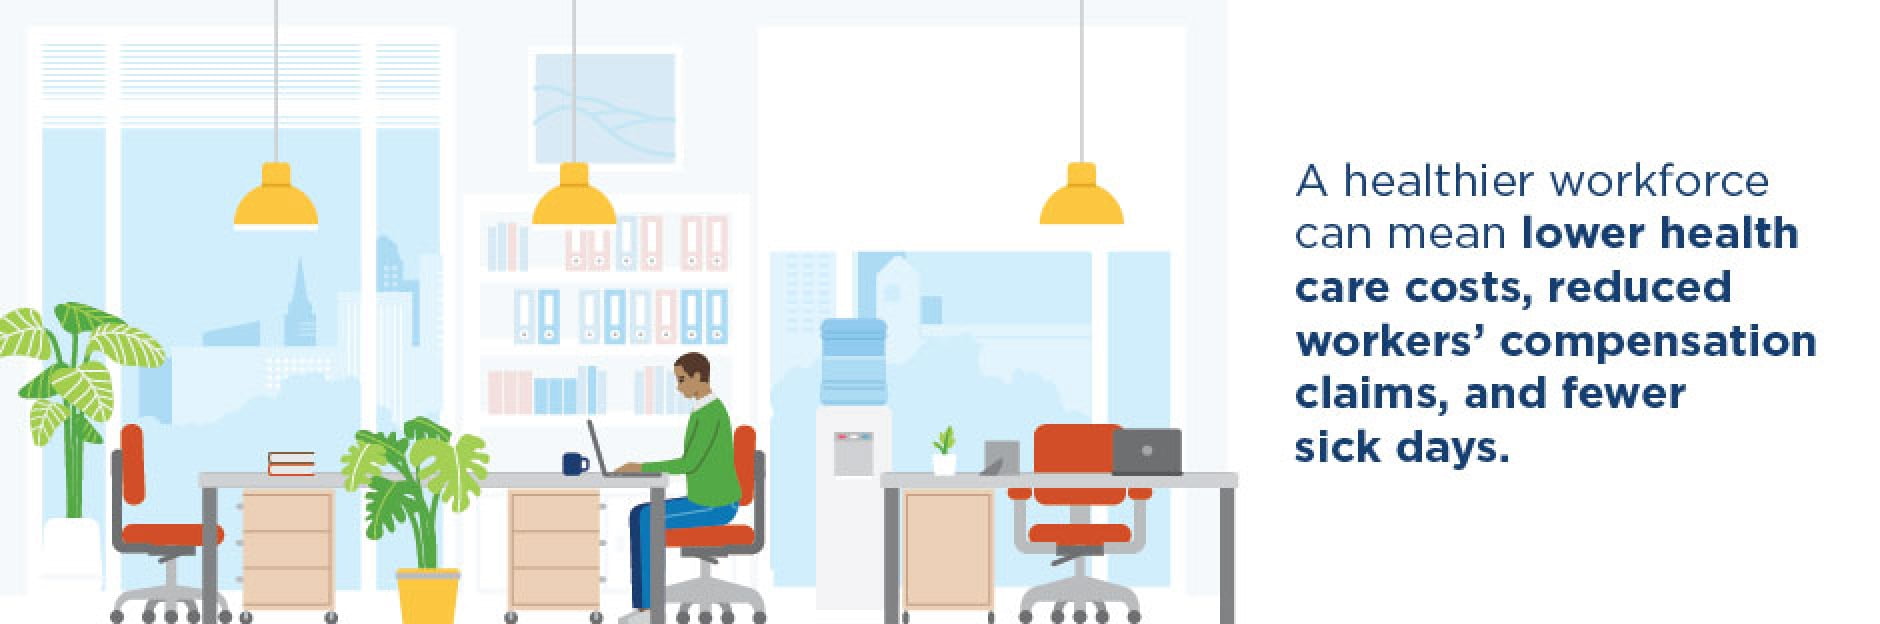 Illustration of a man working alone in a colorful open plan office with caption: A healthier workforce can mean lower health care costs, reduced workers’ compensation claims, and fewer sick days